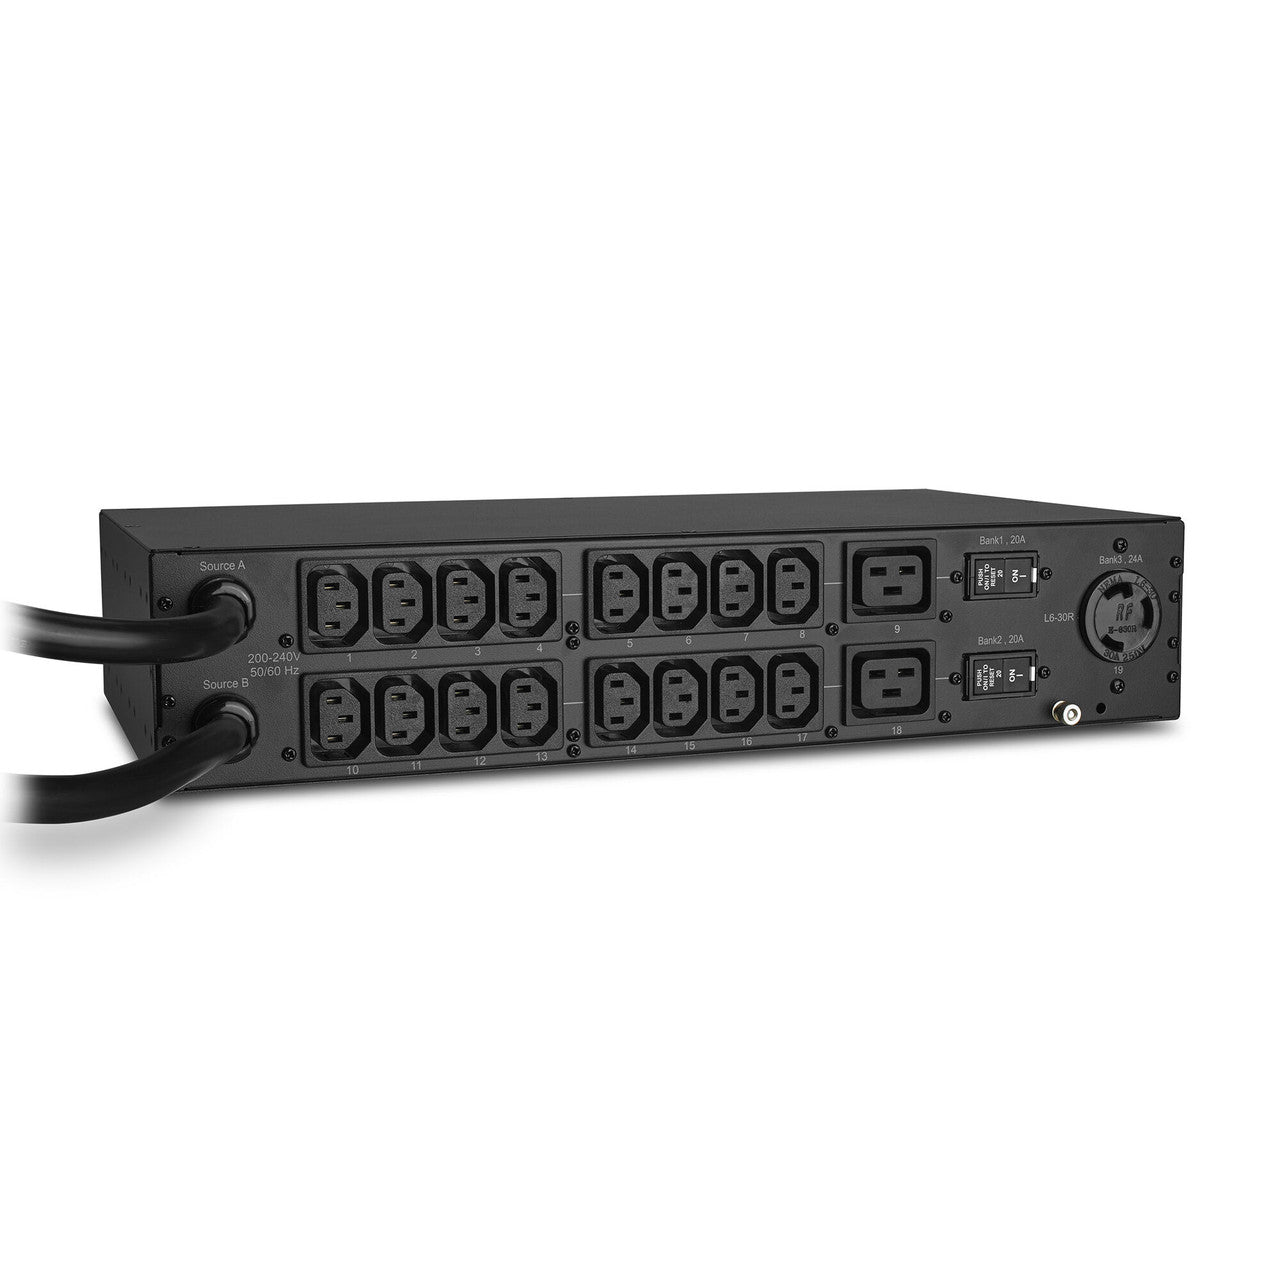 CyberPower PDU30MHVT19AT 30A (Derated to 24A), 200 - 240 V, 2x L6-30P plugs, 19 rear